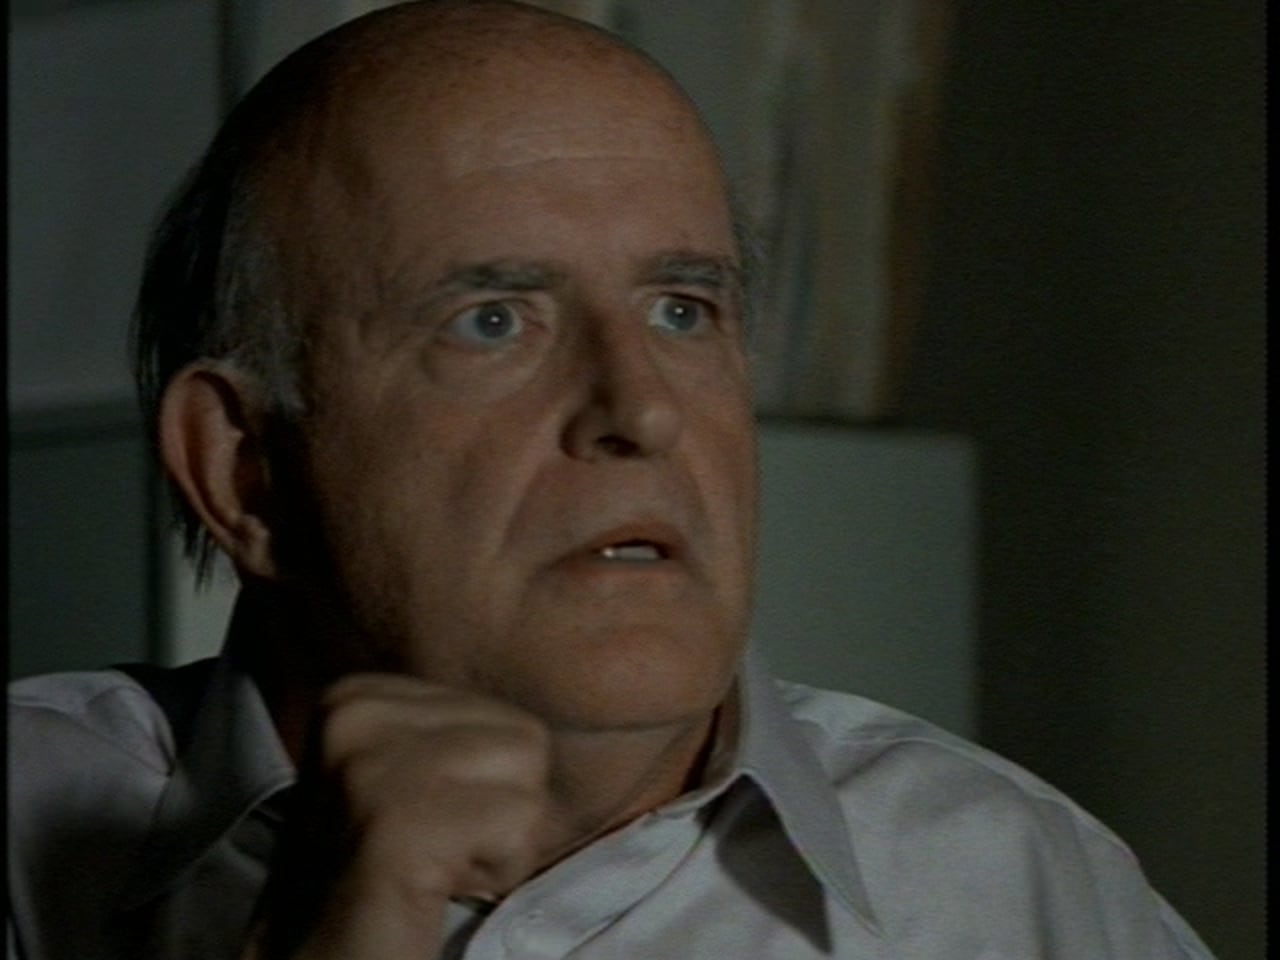 The X-Files - Season 0 Episode 47 : Behind the truth - Clyde Bruckman